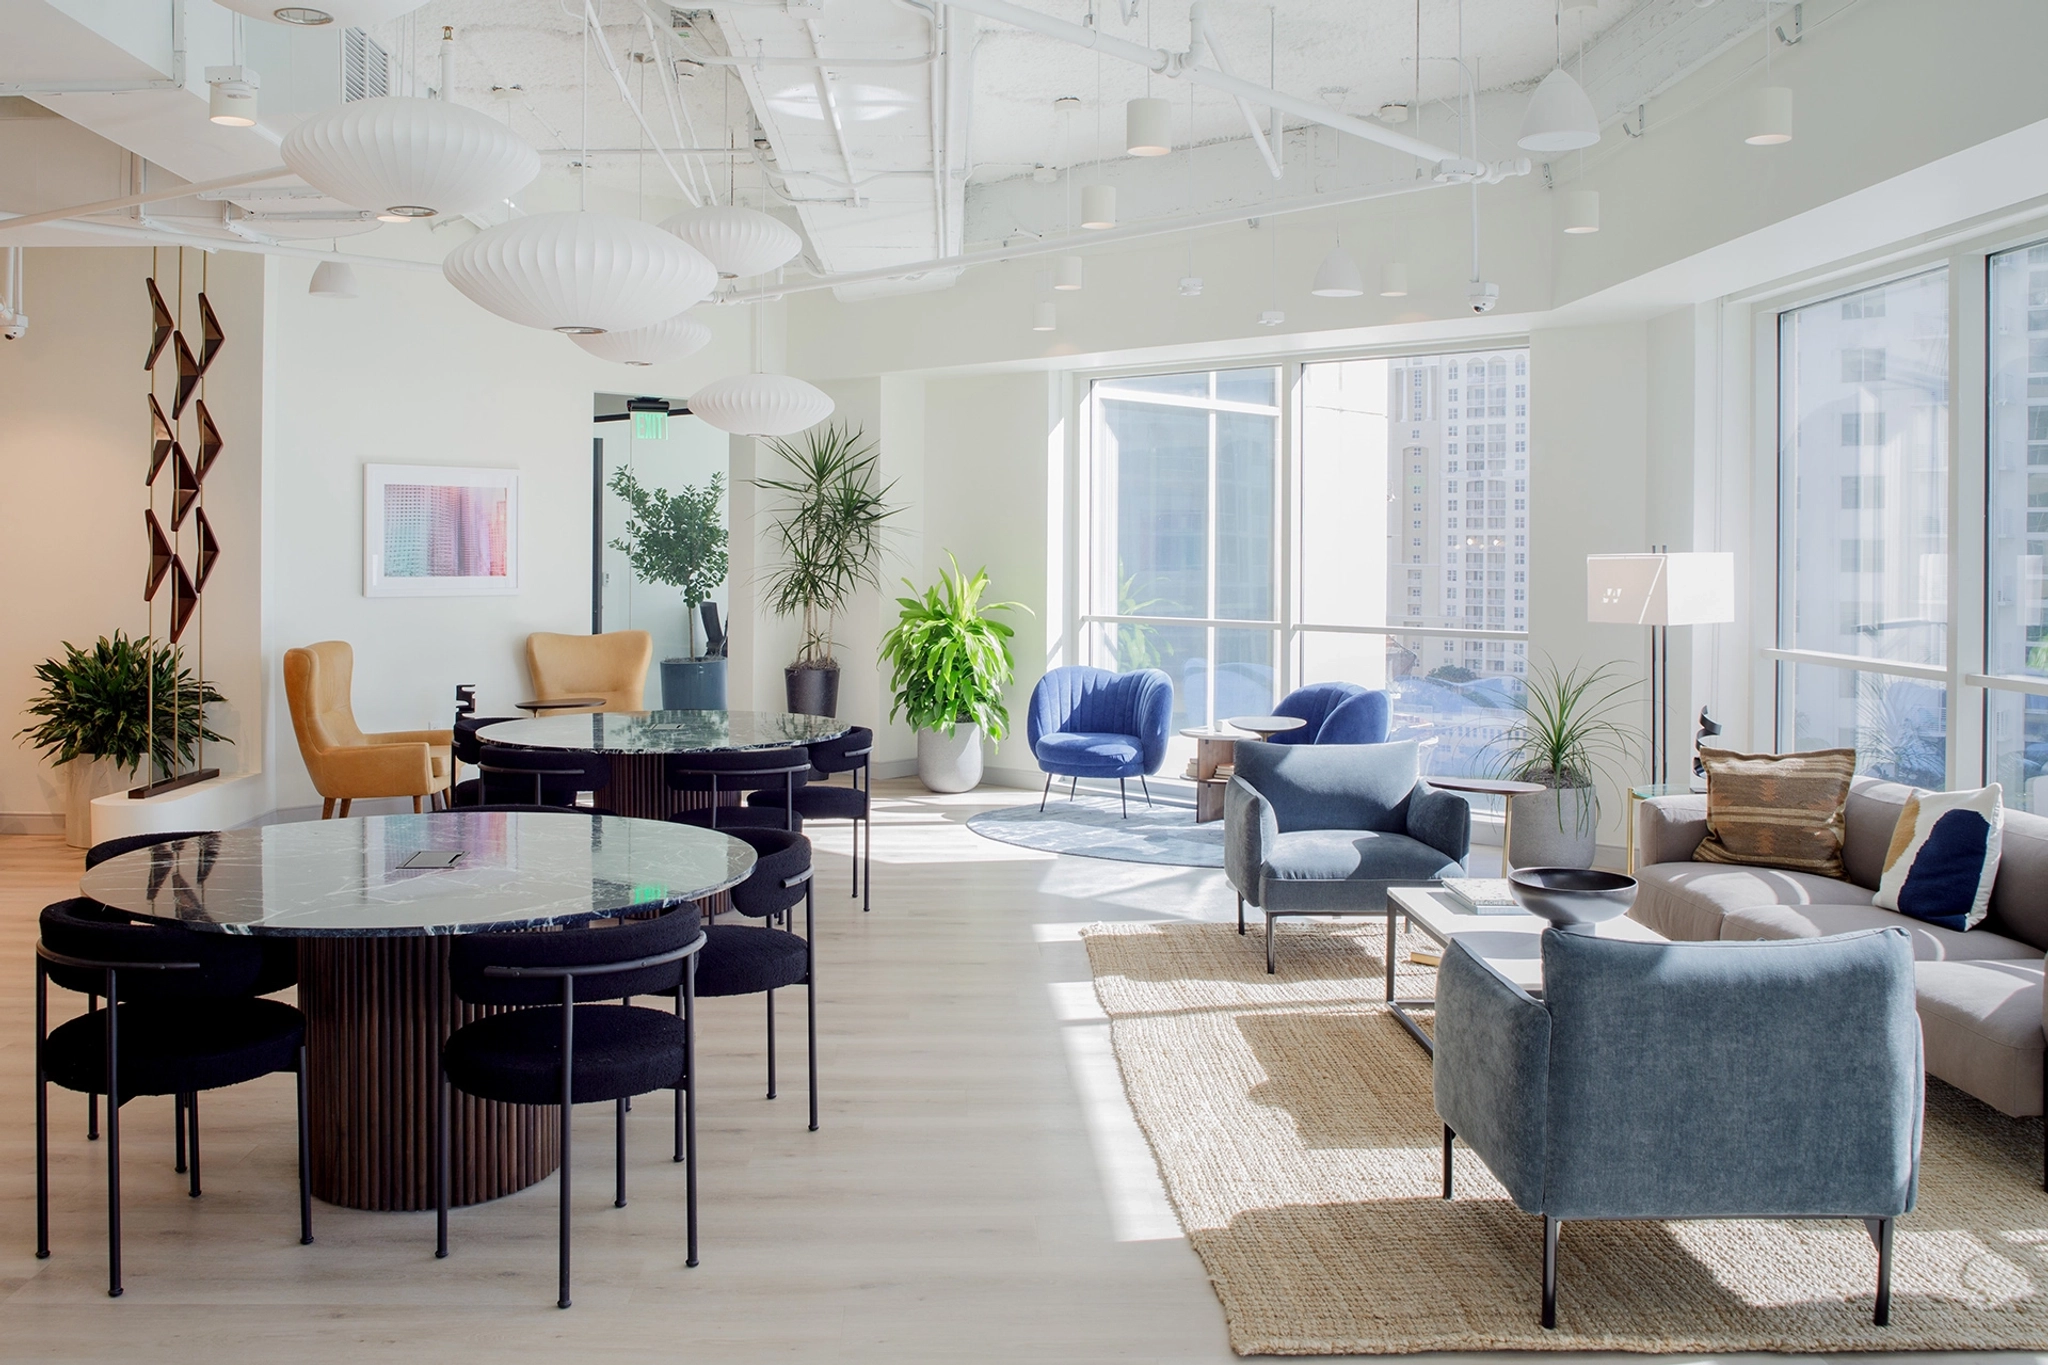 A modern, well-lit office lounge area in Fort Lauderdale features round tables with black chairs, blue armchairs, a gray sofa, and numerous indoor plants near large windows with city views—a perfect workspace or informal meeting room.